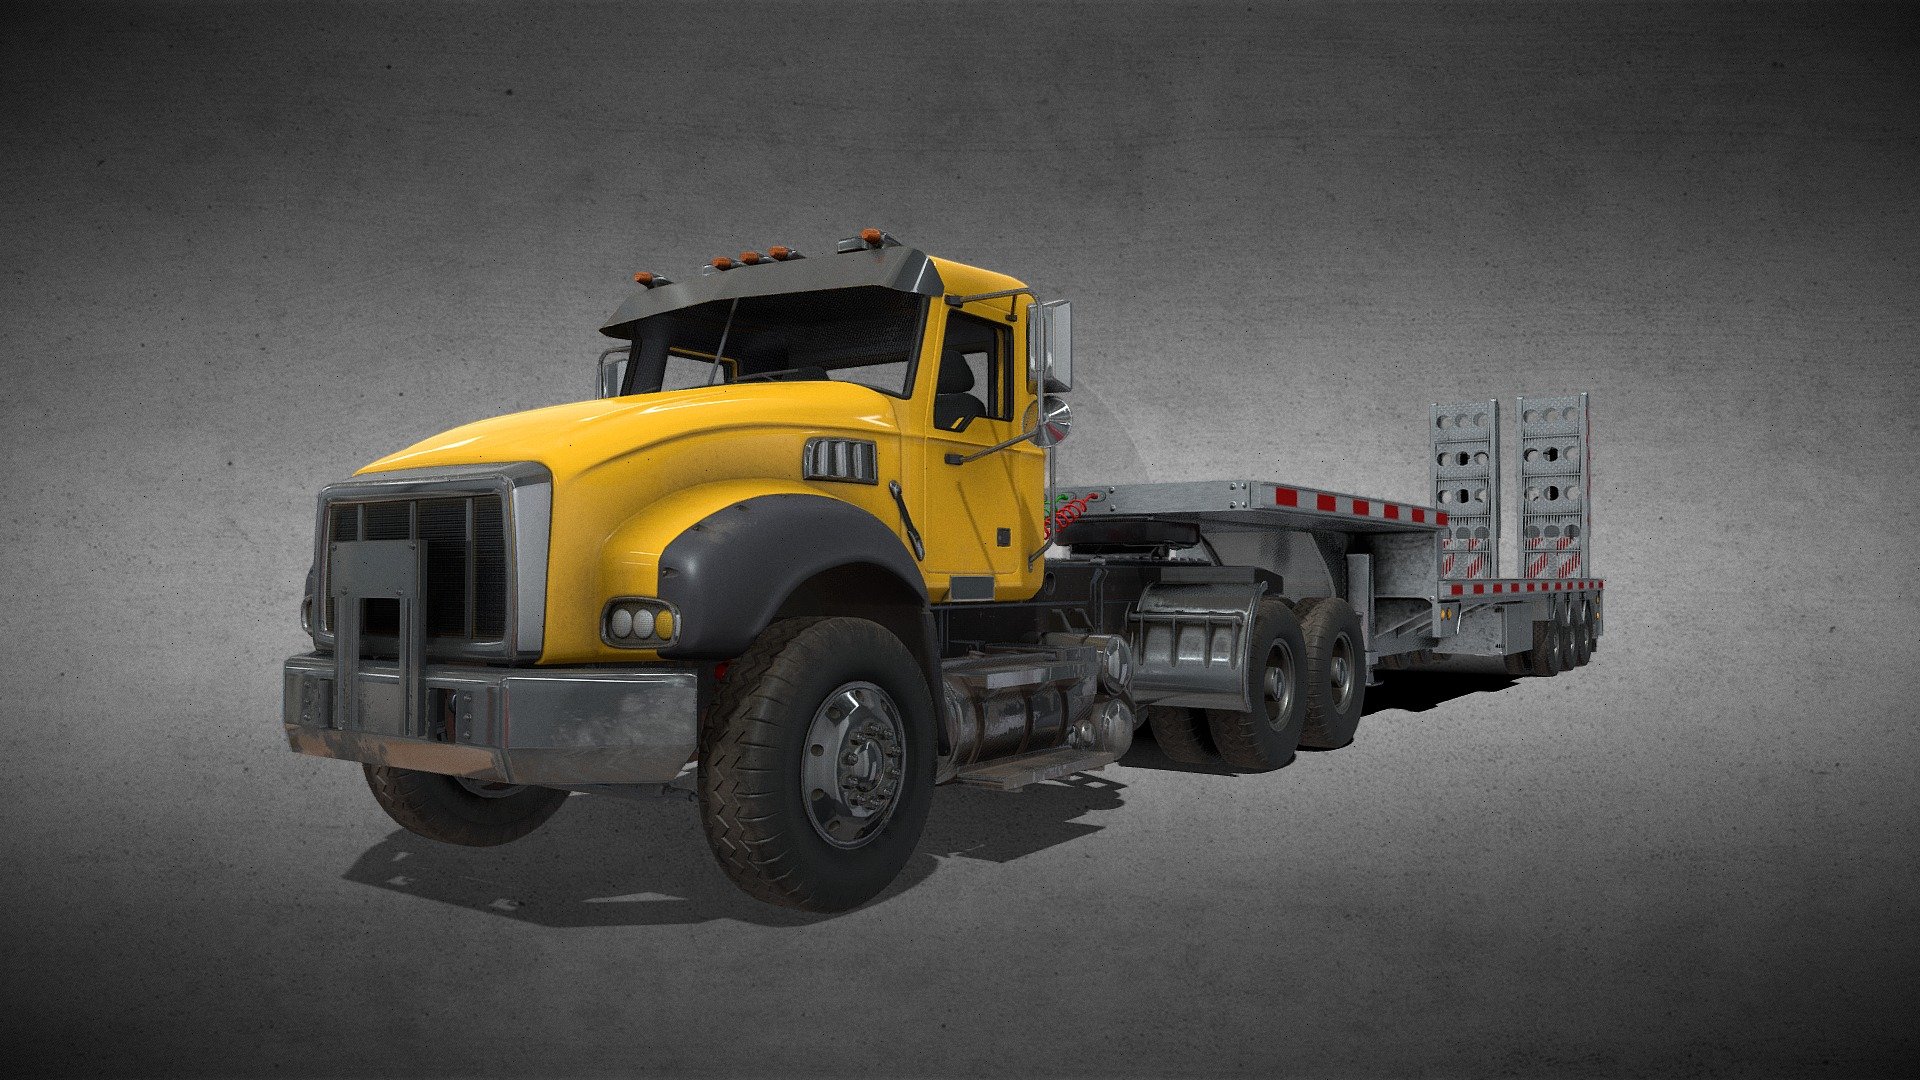 Truck with Step Deck Trailer made in Maya

Custom made using reference from various different existing vehicles
Contains UV’d model, skeleton with NO RIGGING. Cables should retain skinning. Textures in 2k and 4k

405,256 tris

13 materials, 5 textures each

PBR textures: BaseColor, Normal, Roughness, Metal, AO

tiff format with alphas where needed on the exhaust pipe, and the cab windows

Unreal
13 materials, 3 textures each: BaseColor, Normal, Packed (Occlusion, Roughness, Metallic) - Truck with Step Deck Trailer - Buy Royalty Free 3D model by Phil Rivera (@philrivera) 3d model